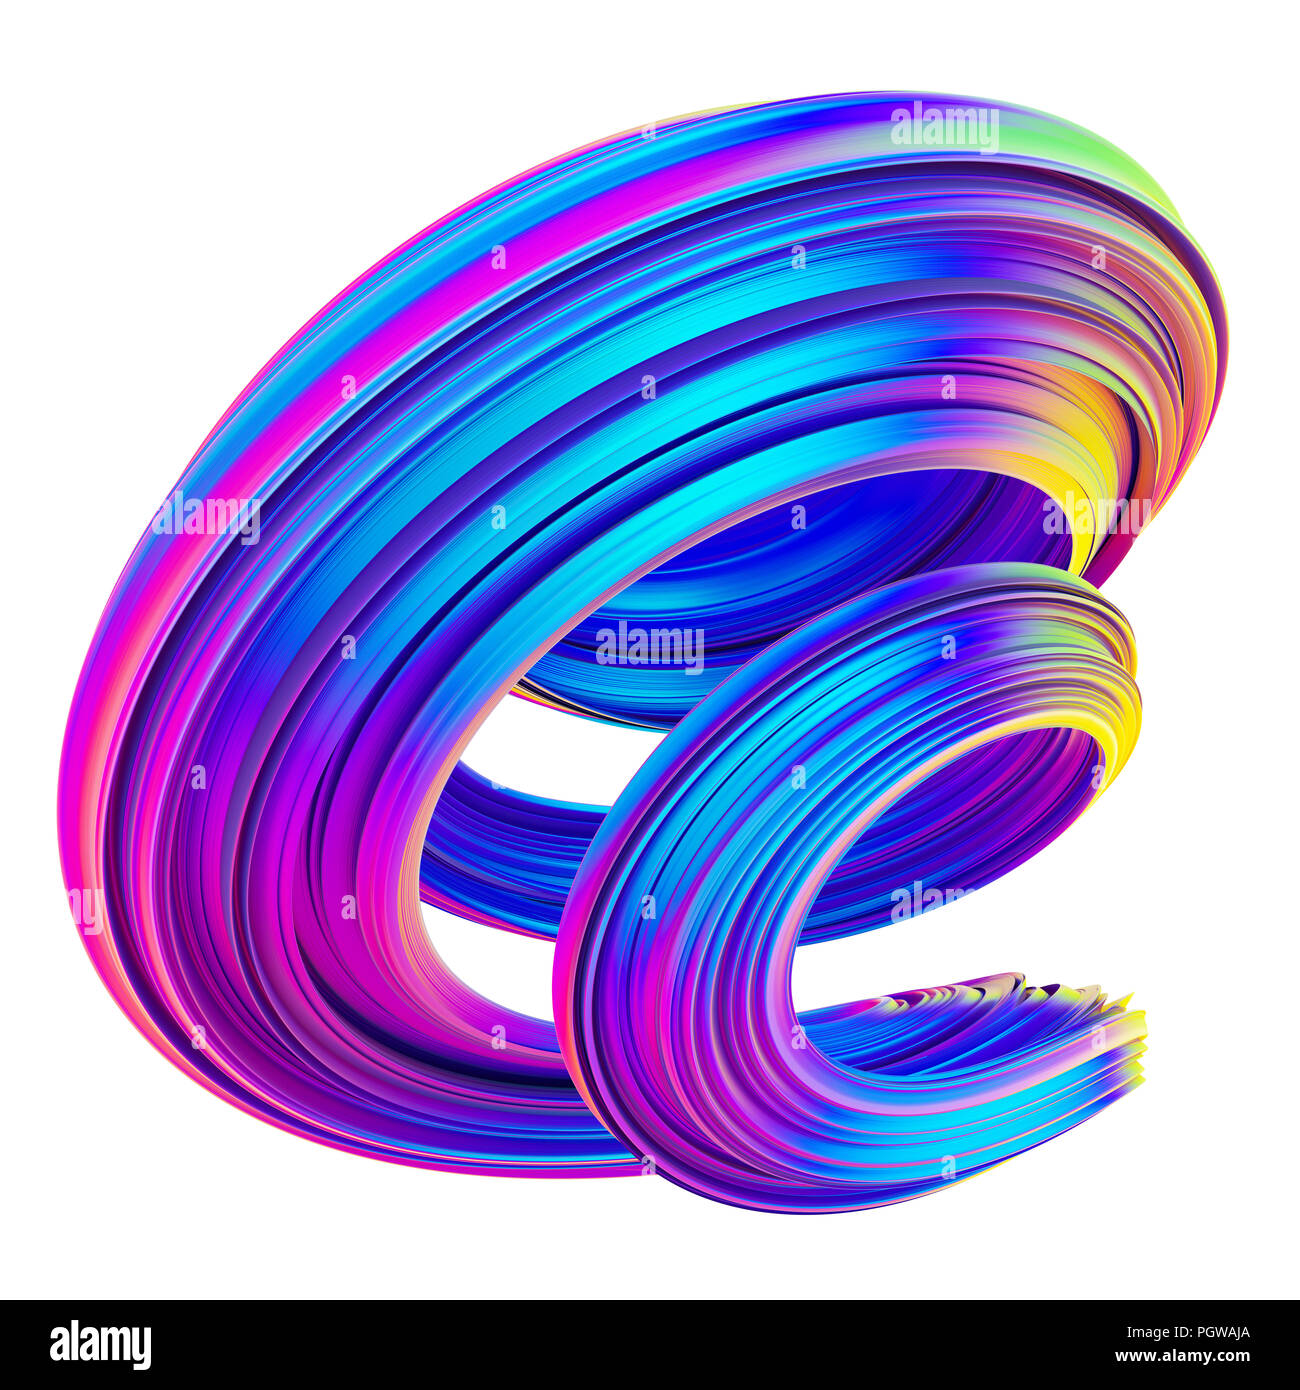 Neon and holographic colored 3d twisted shape. Stock Photo